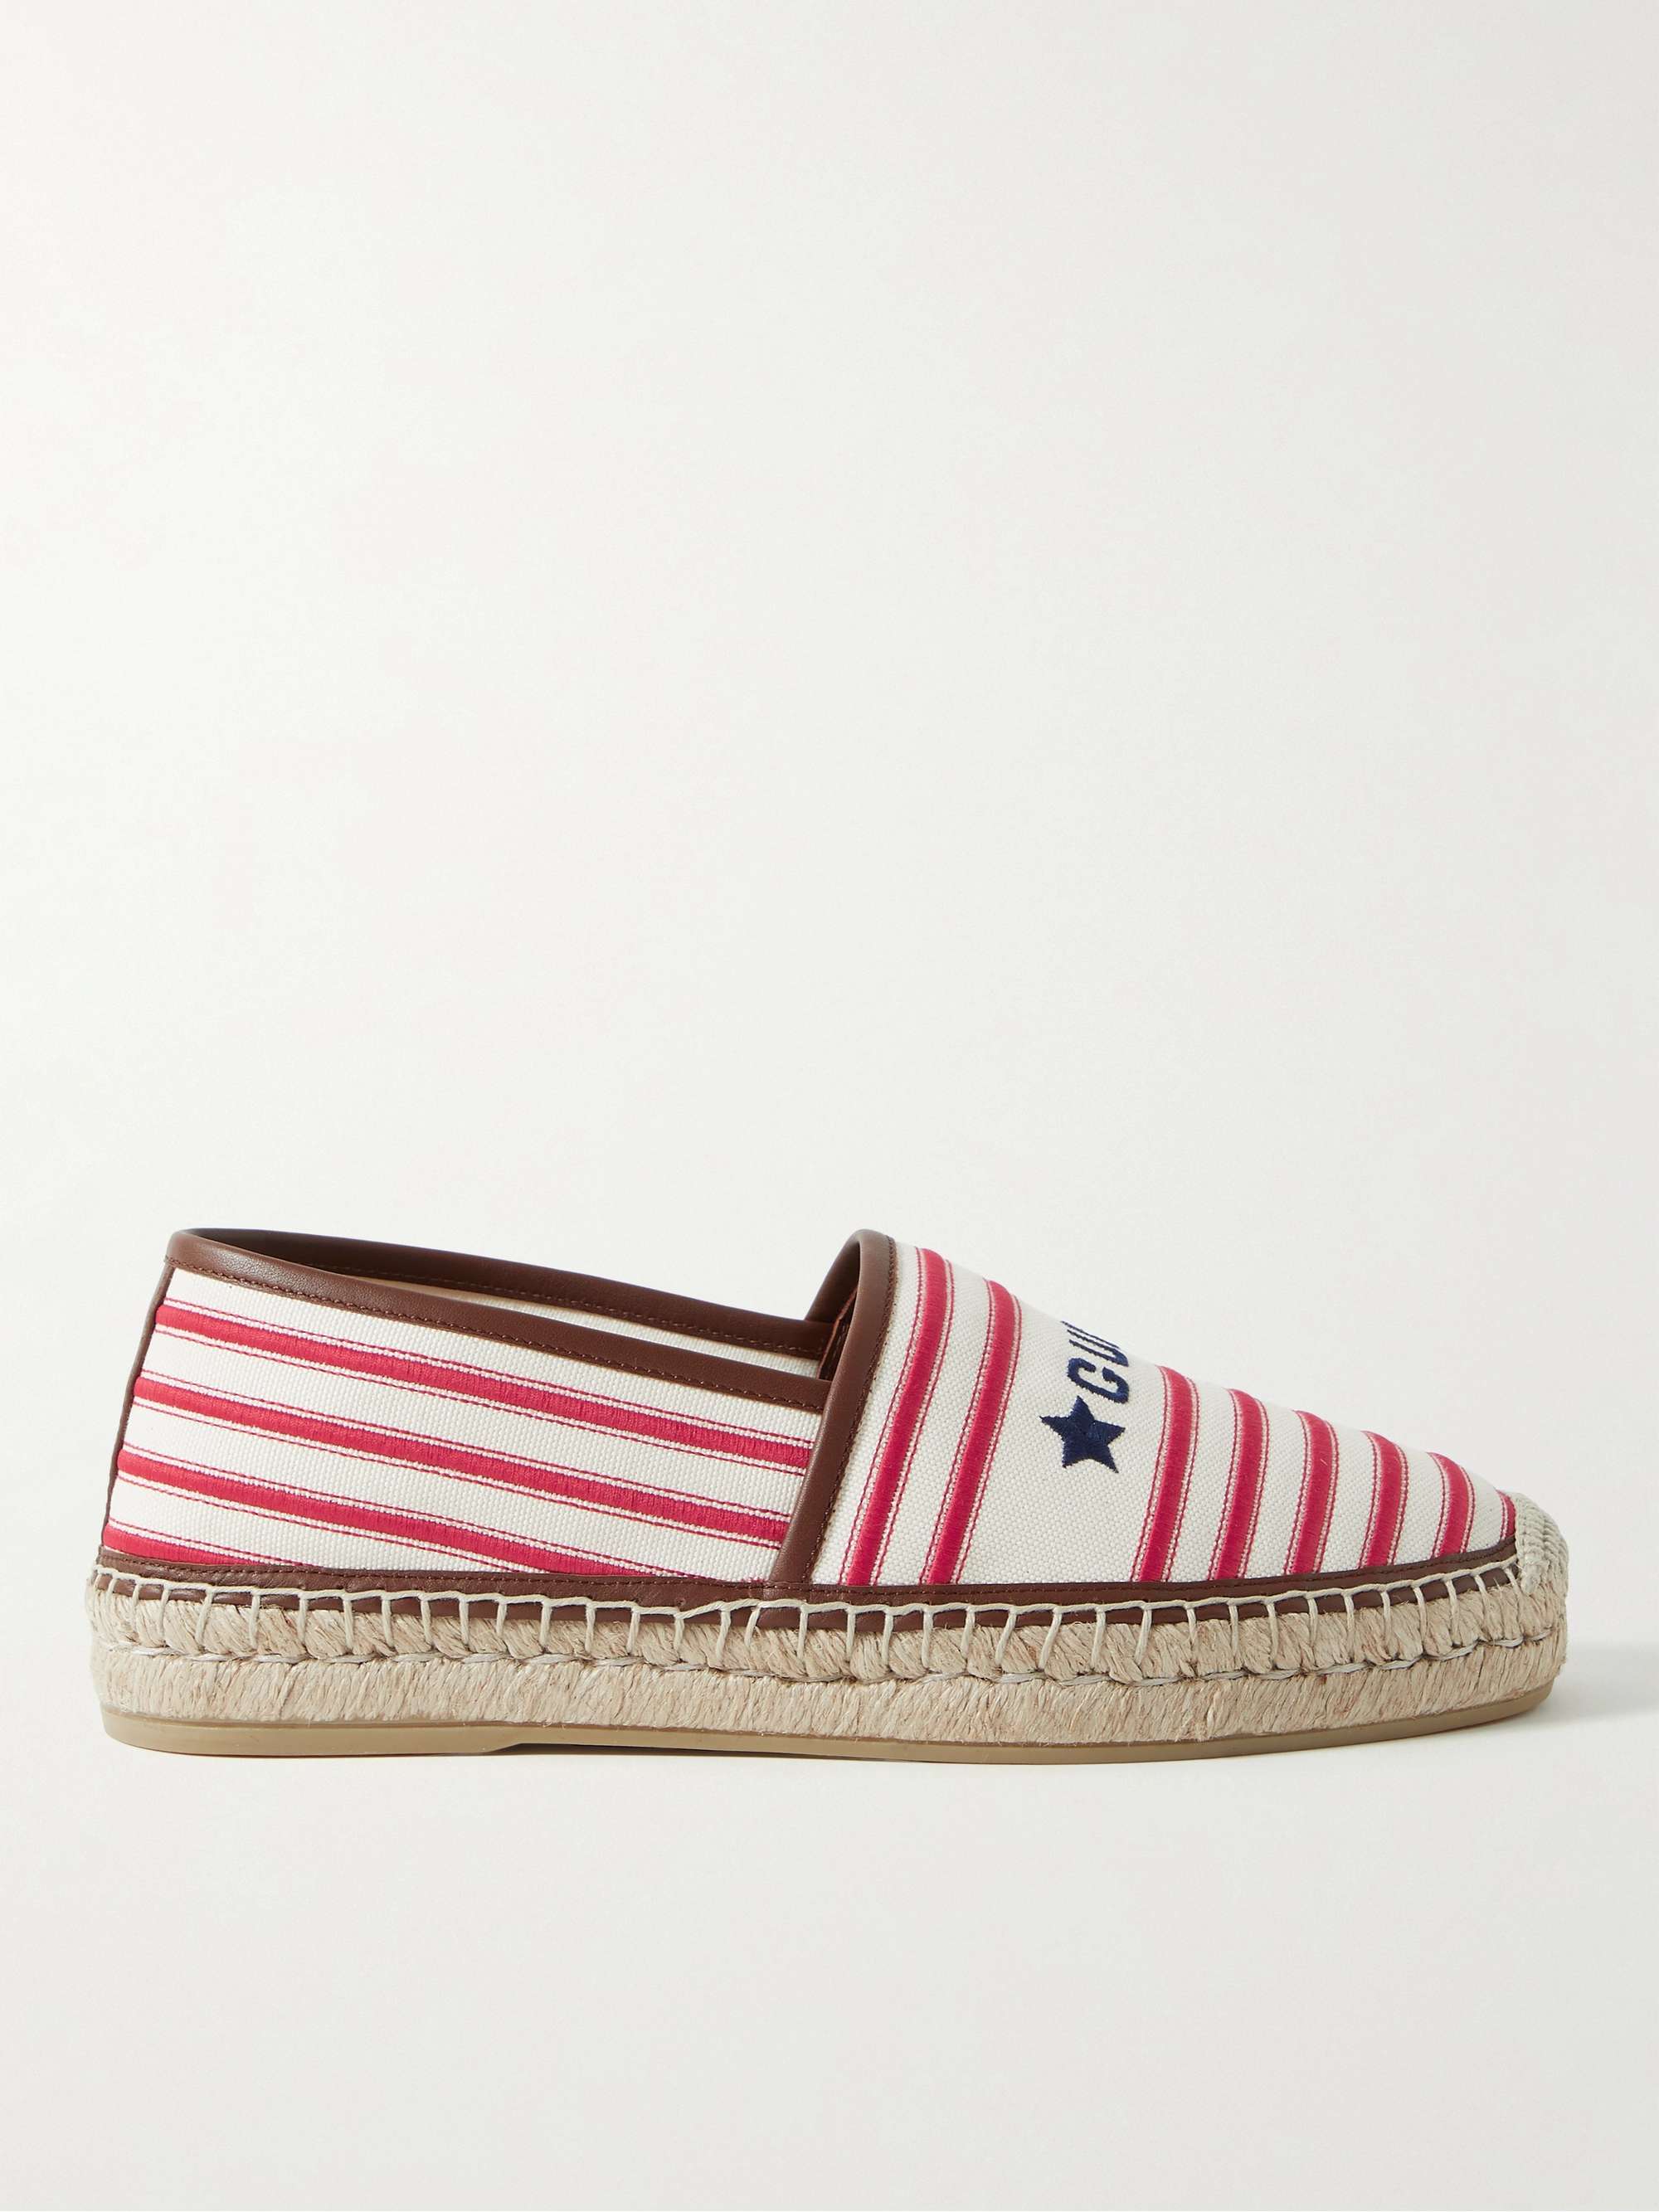 GUCCI Leather-Trimmed Embroidered Canvas Espadrilles